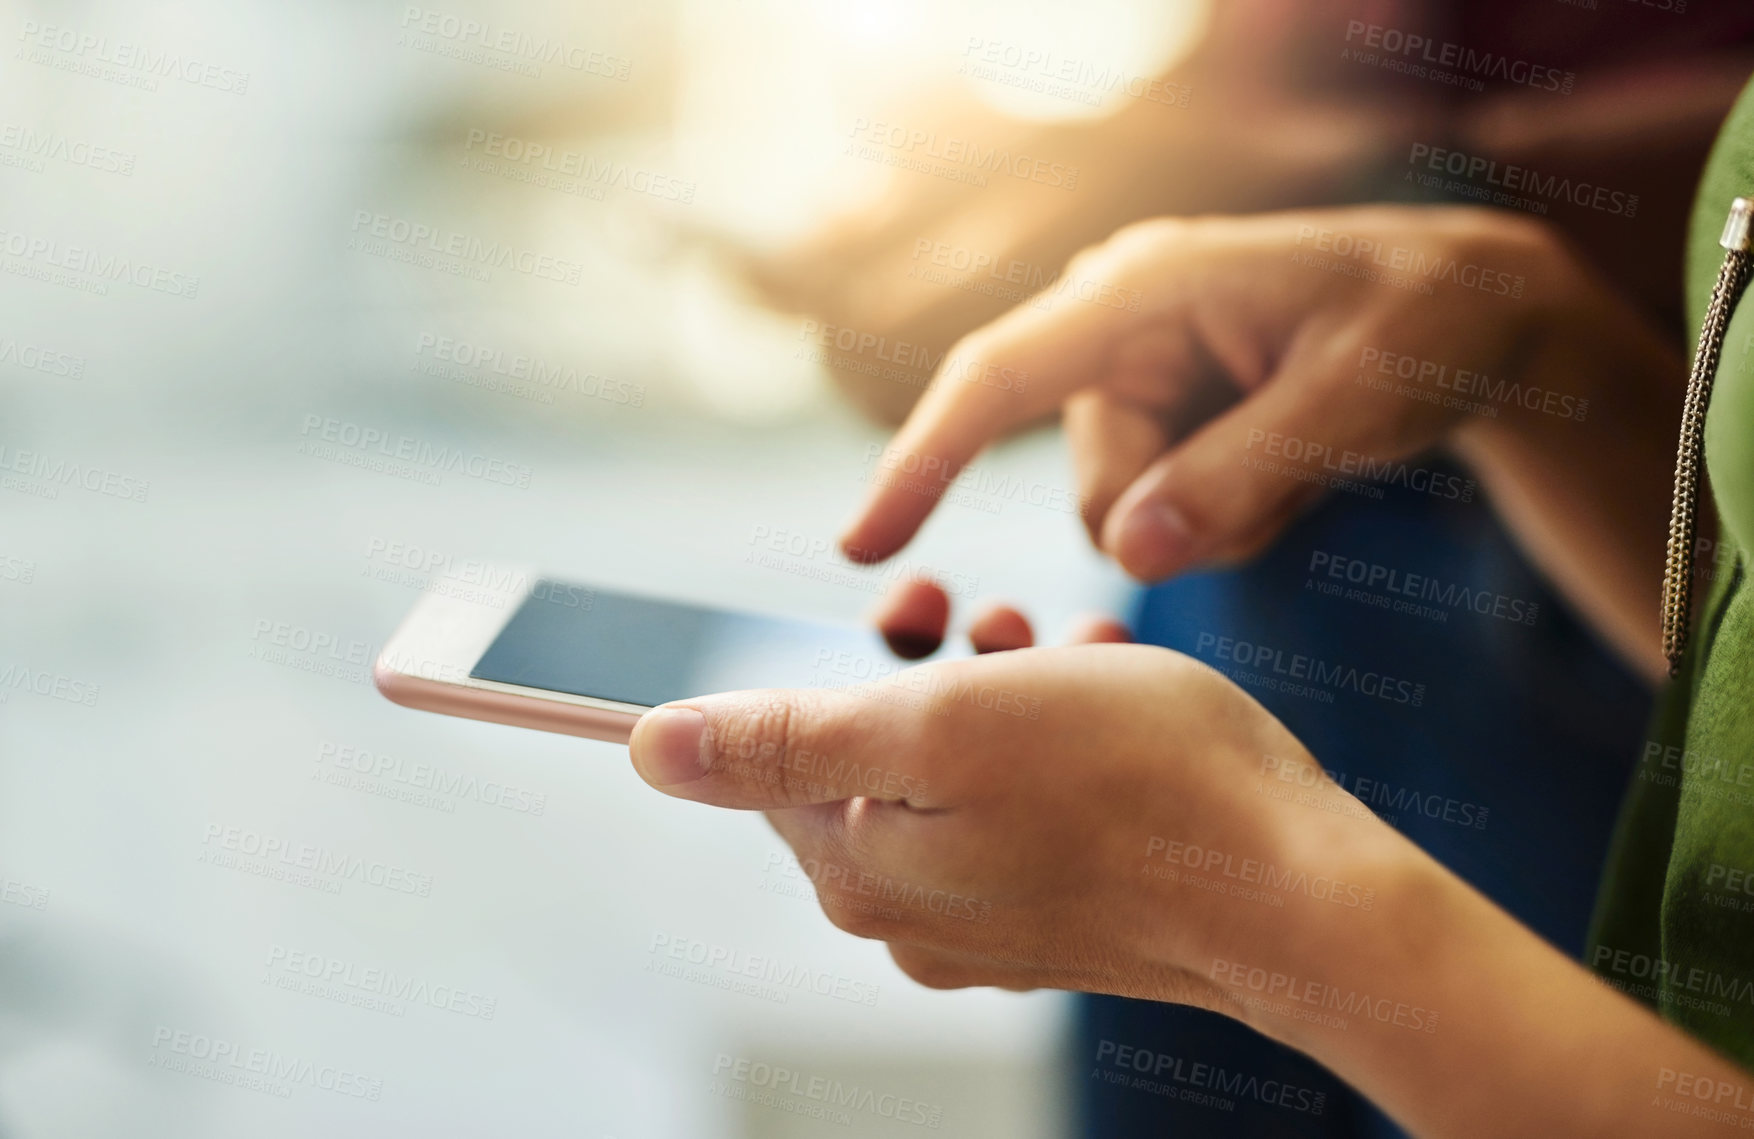 Buy stock photo Closeup of hands of a corporate business person typing on a phone while standing in an office. Top view of a professional scrolling through social media, checking and reading texts and sending emails